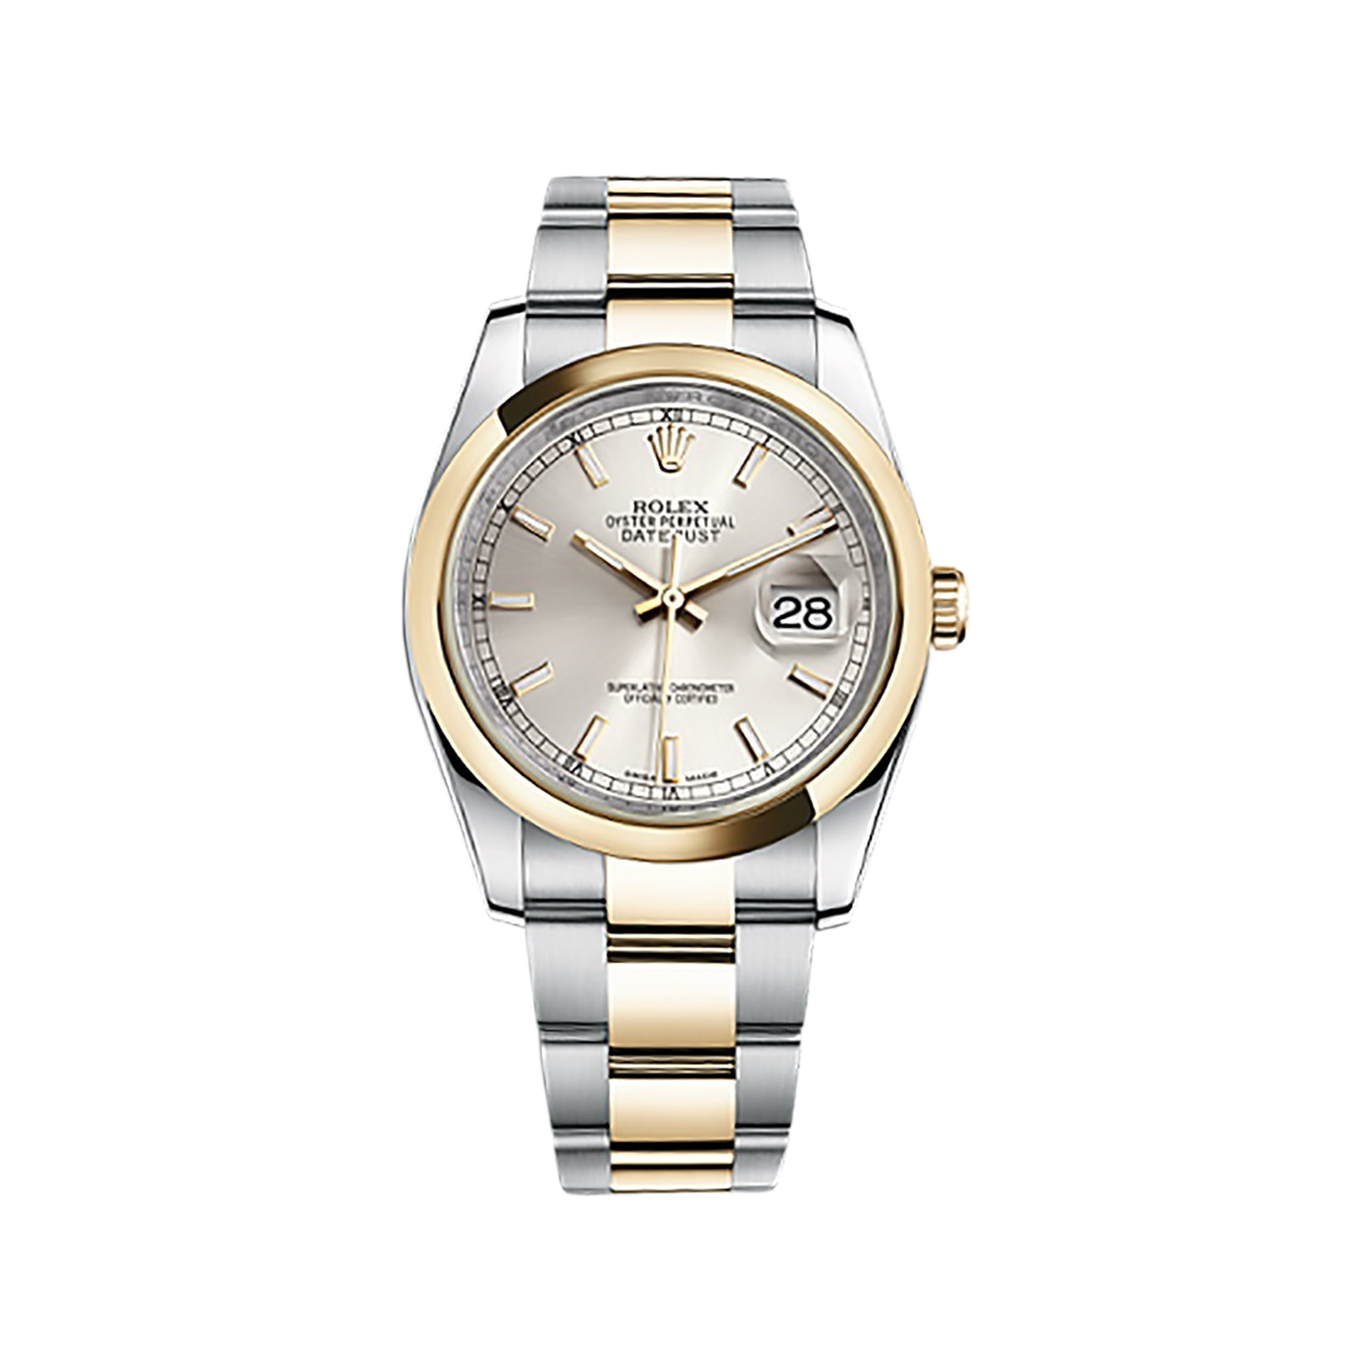 Datejust 36 116203 Gold & Stainless Steel Watch (Silver)